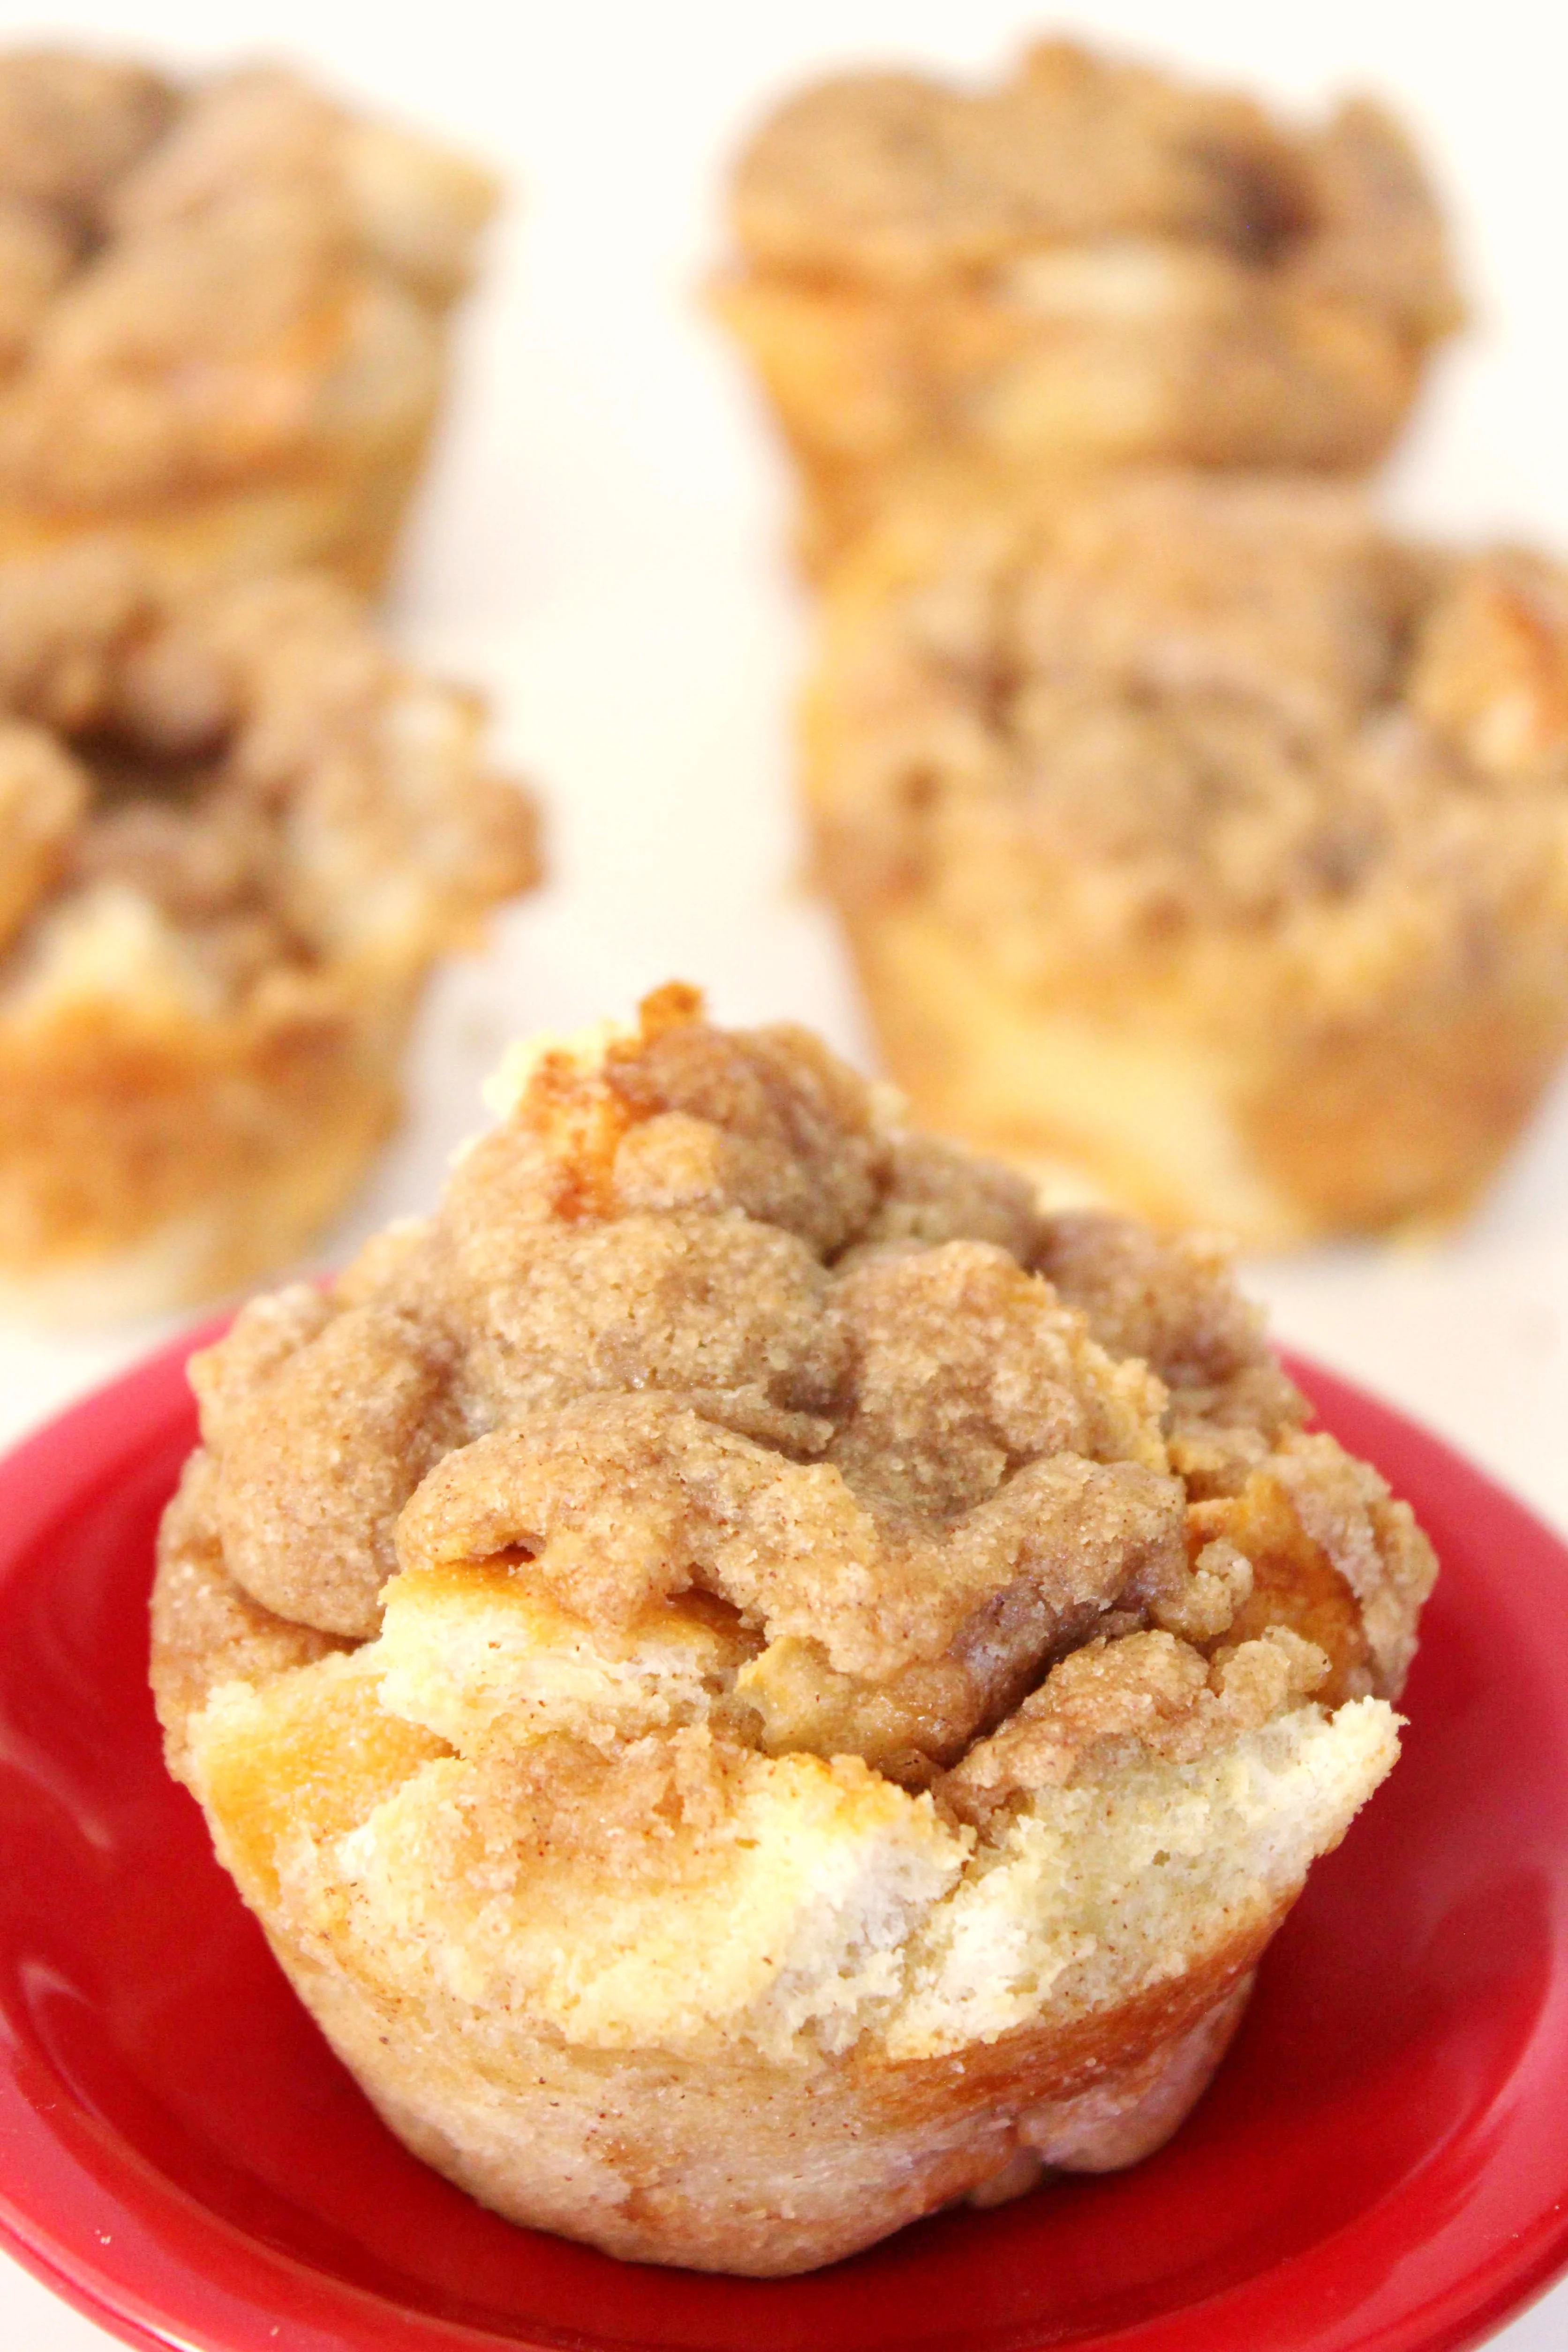 French Toast Muffins are a fun breakfast recipe that really changes things up with a classic food.